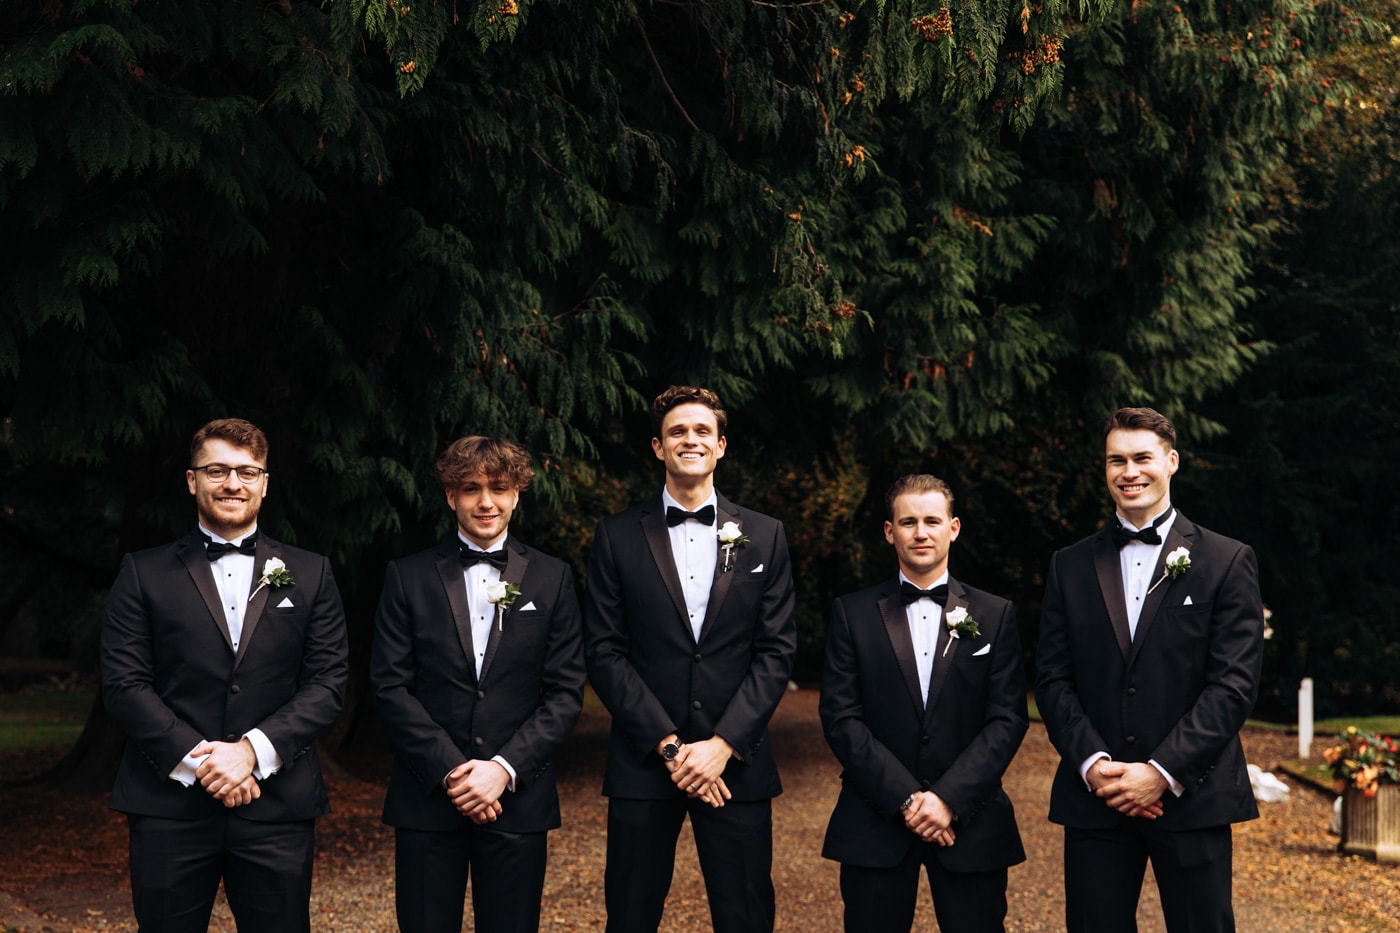 bridal party group photographs at eshott hall during their wedding day photography